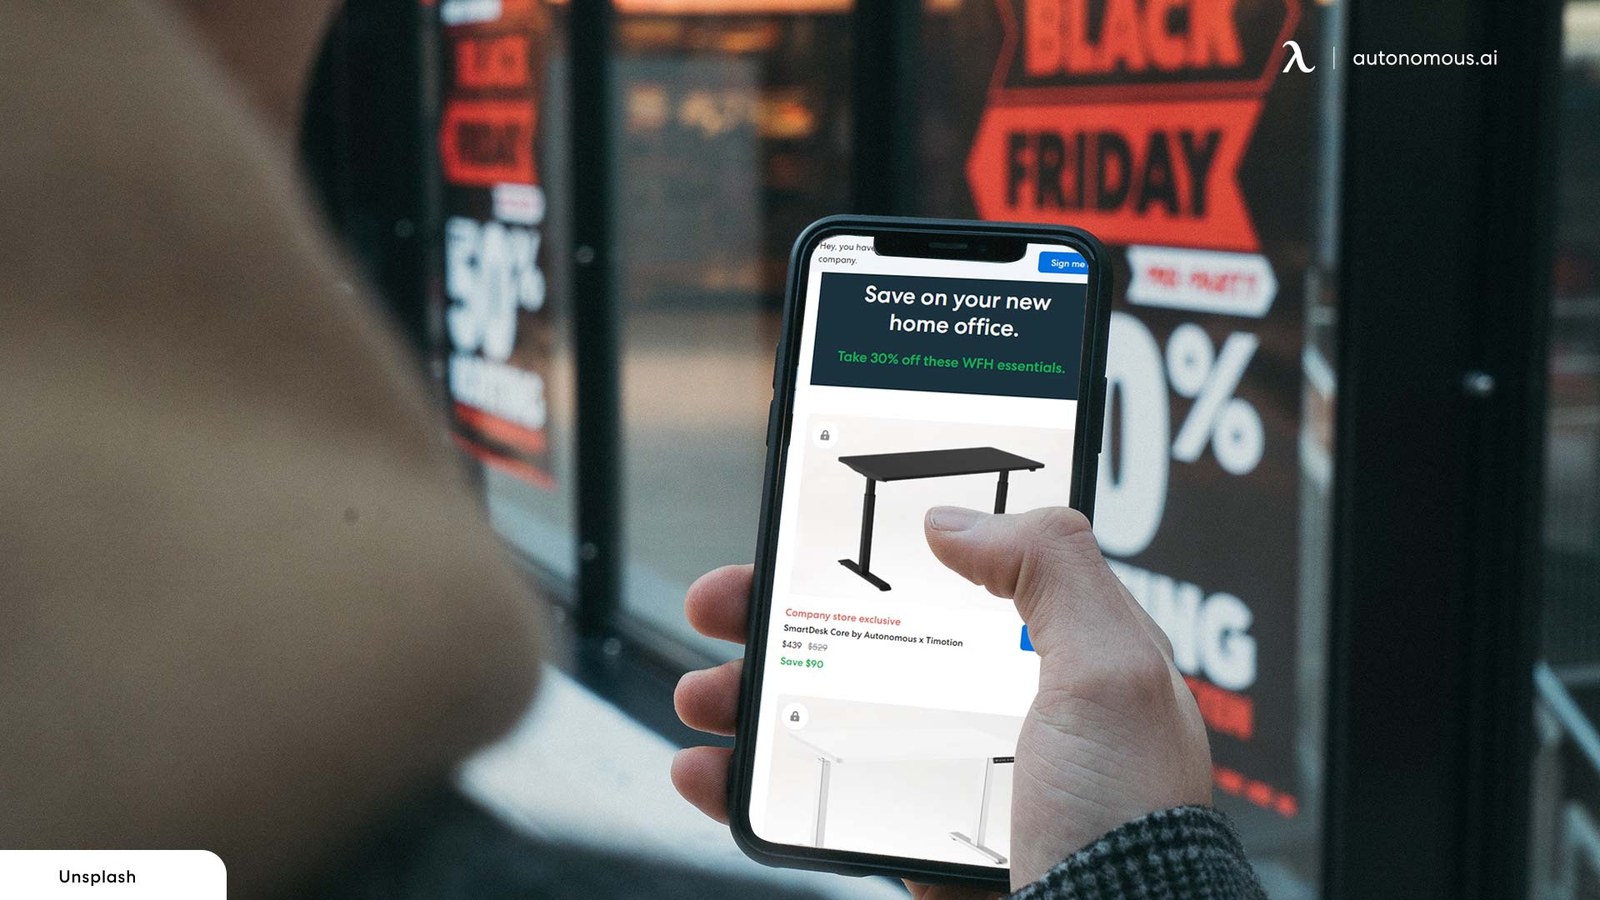 Black Friday Online Deals 2021: Top Sales to Expect